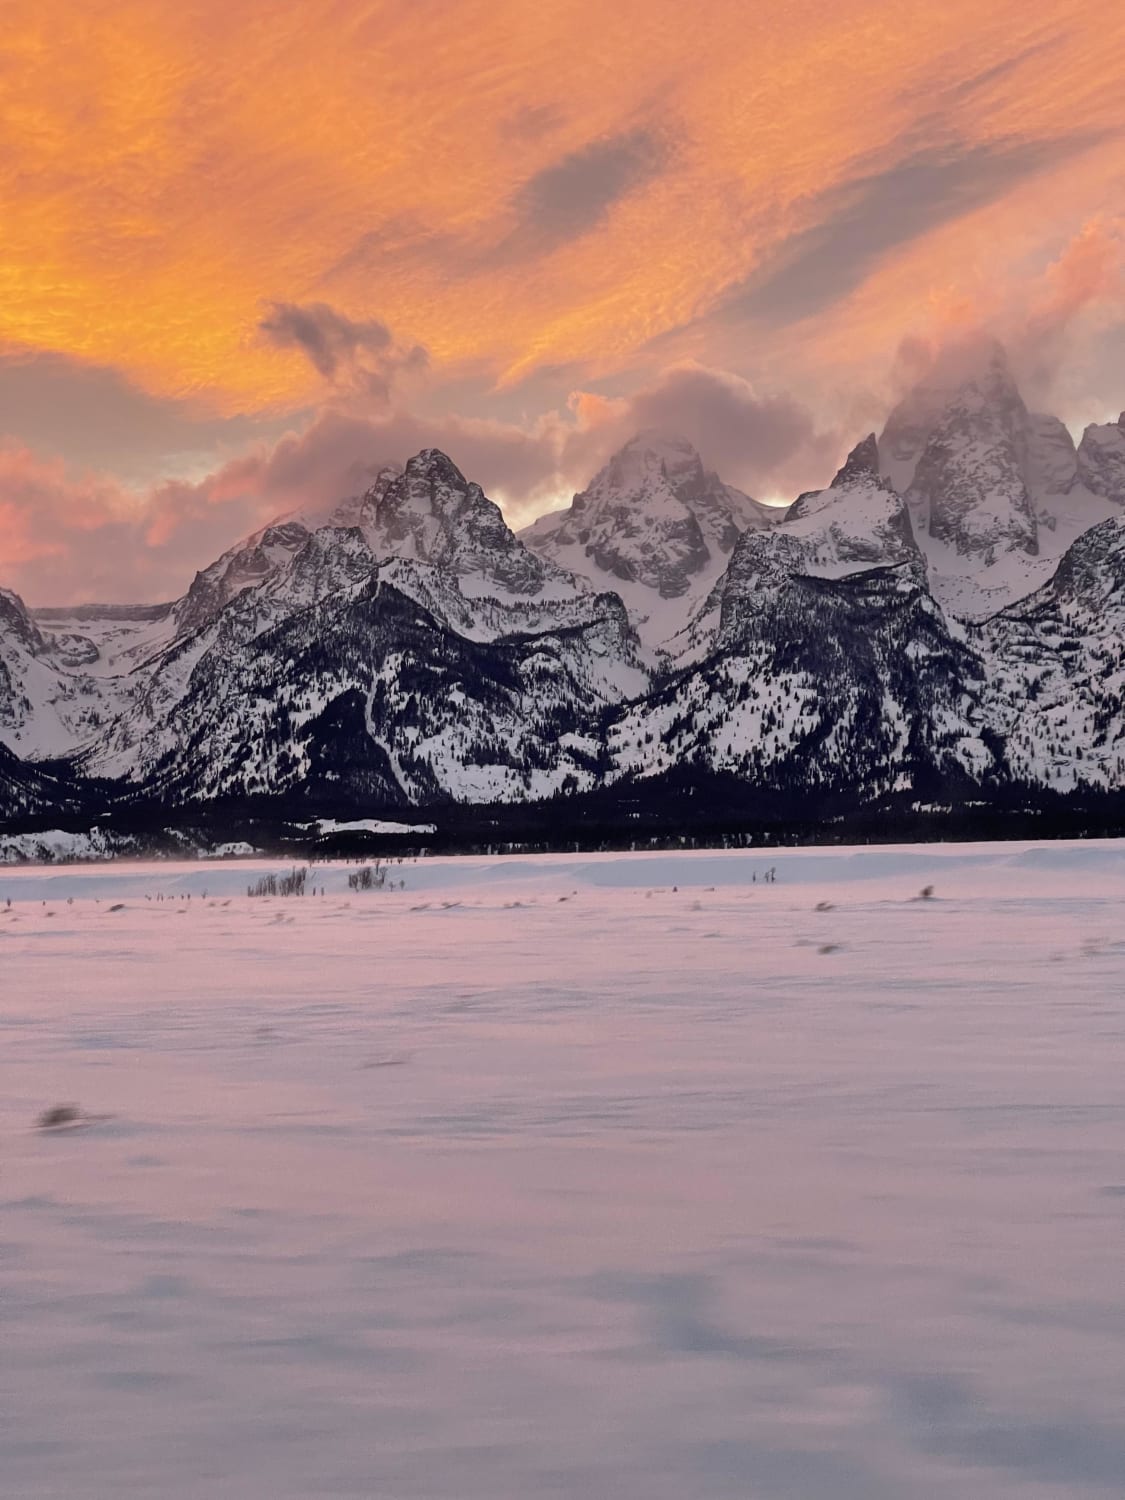 ITAP of the Tetons in WY